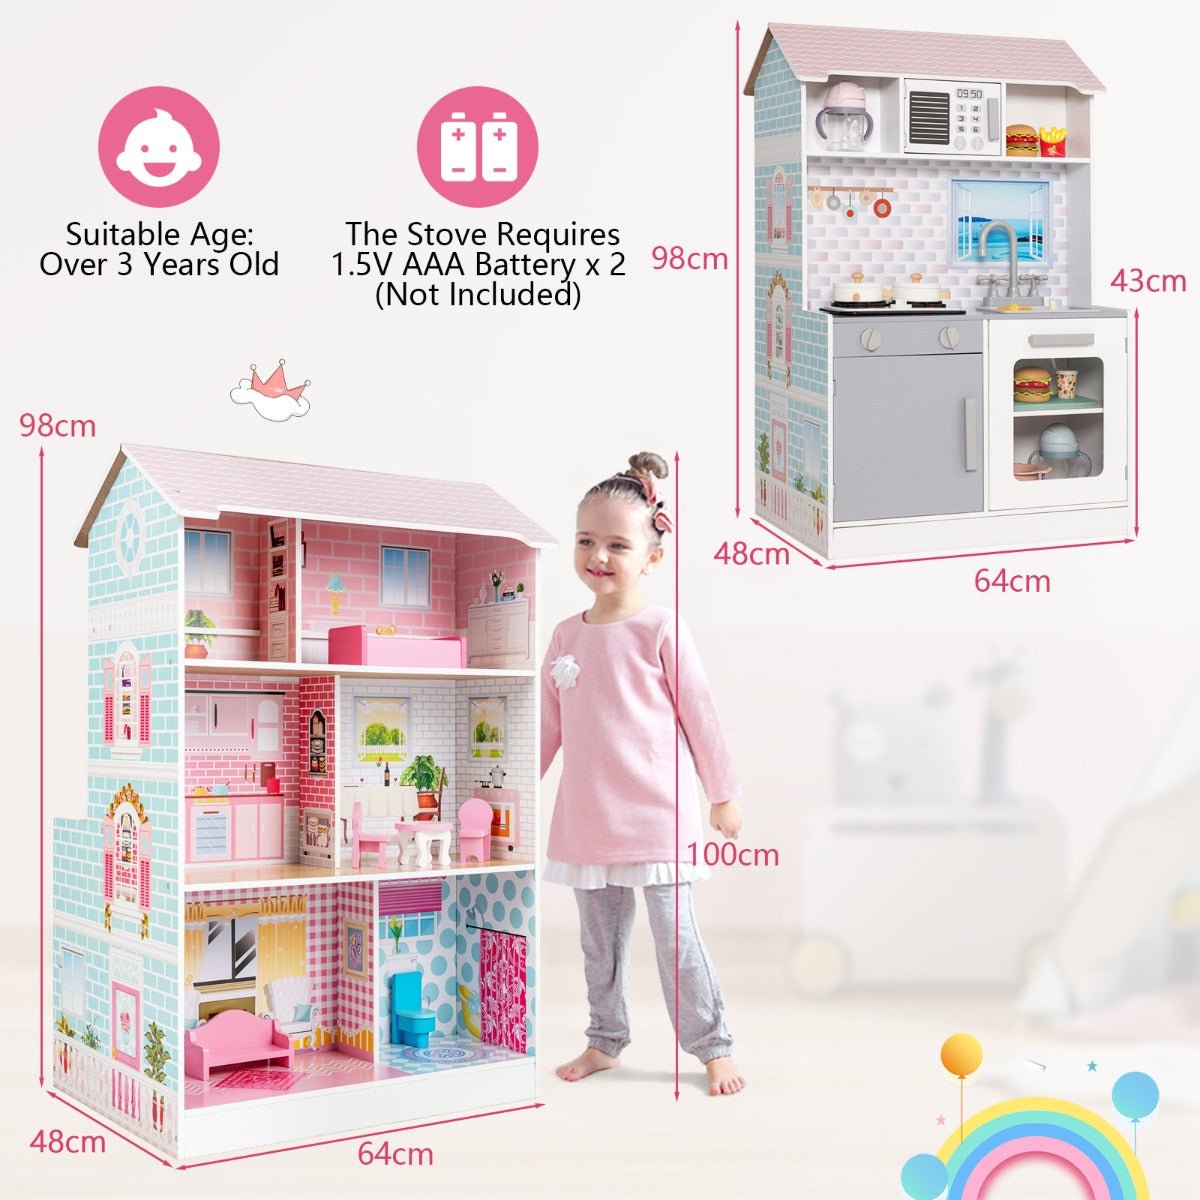 Imaginative Playtime: 2 in 1 Wooden Doll House and Play Kitchen with Accessories